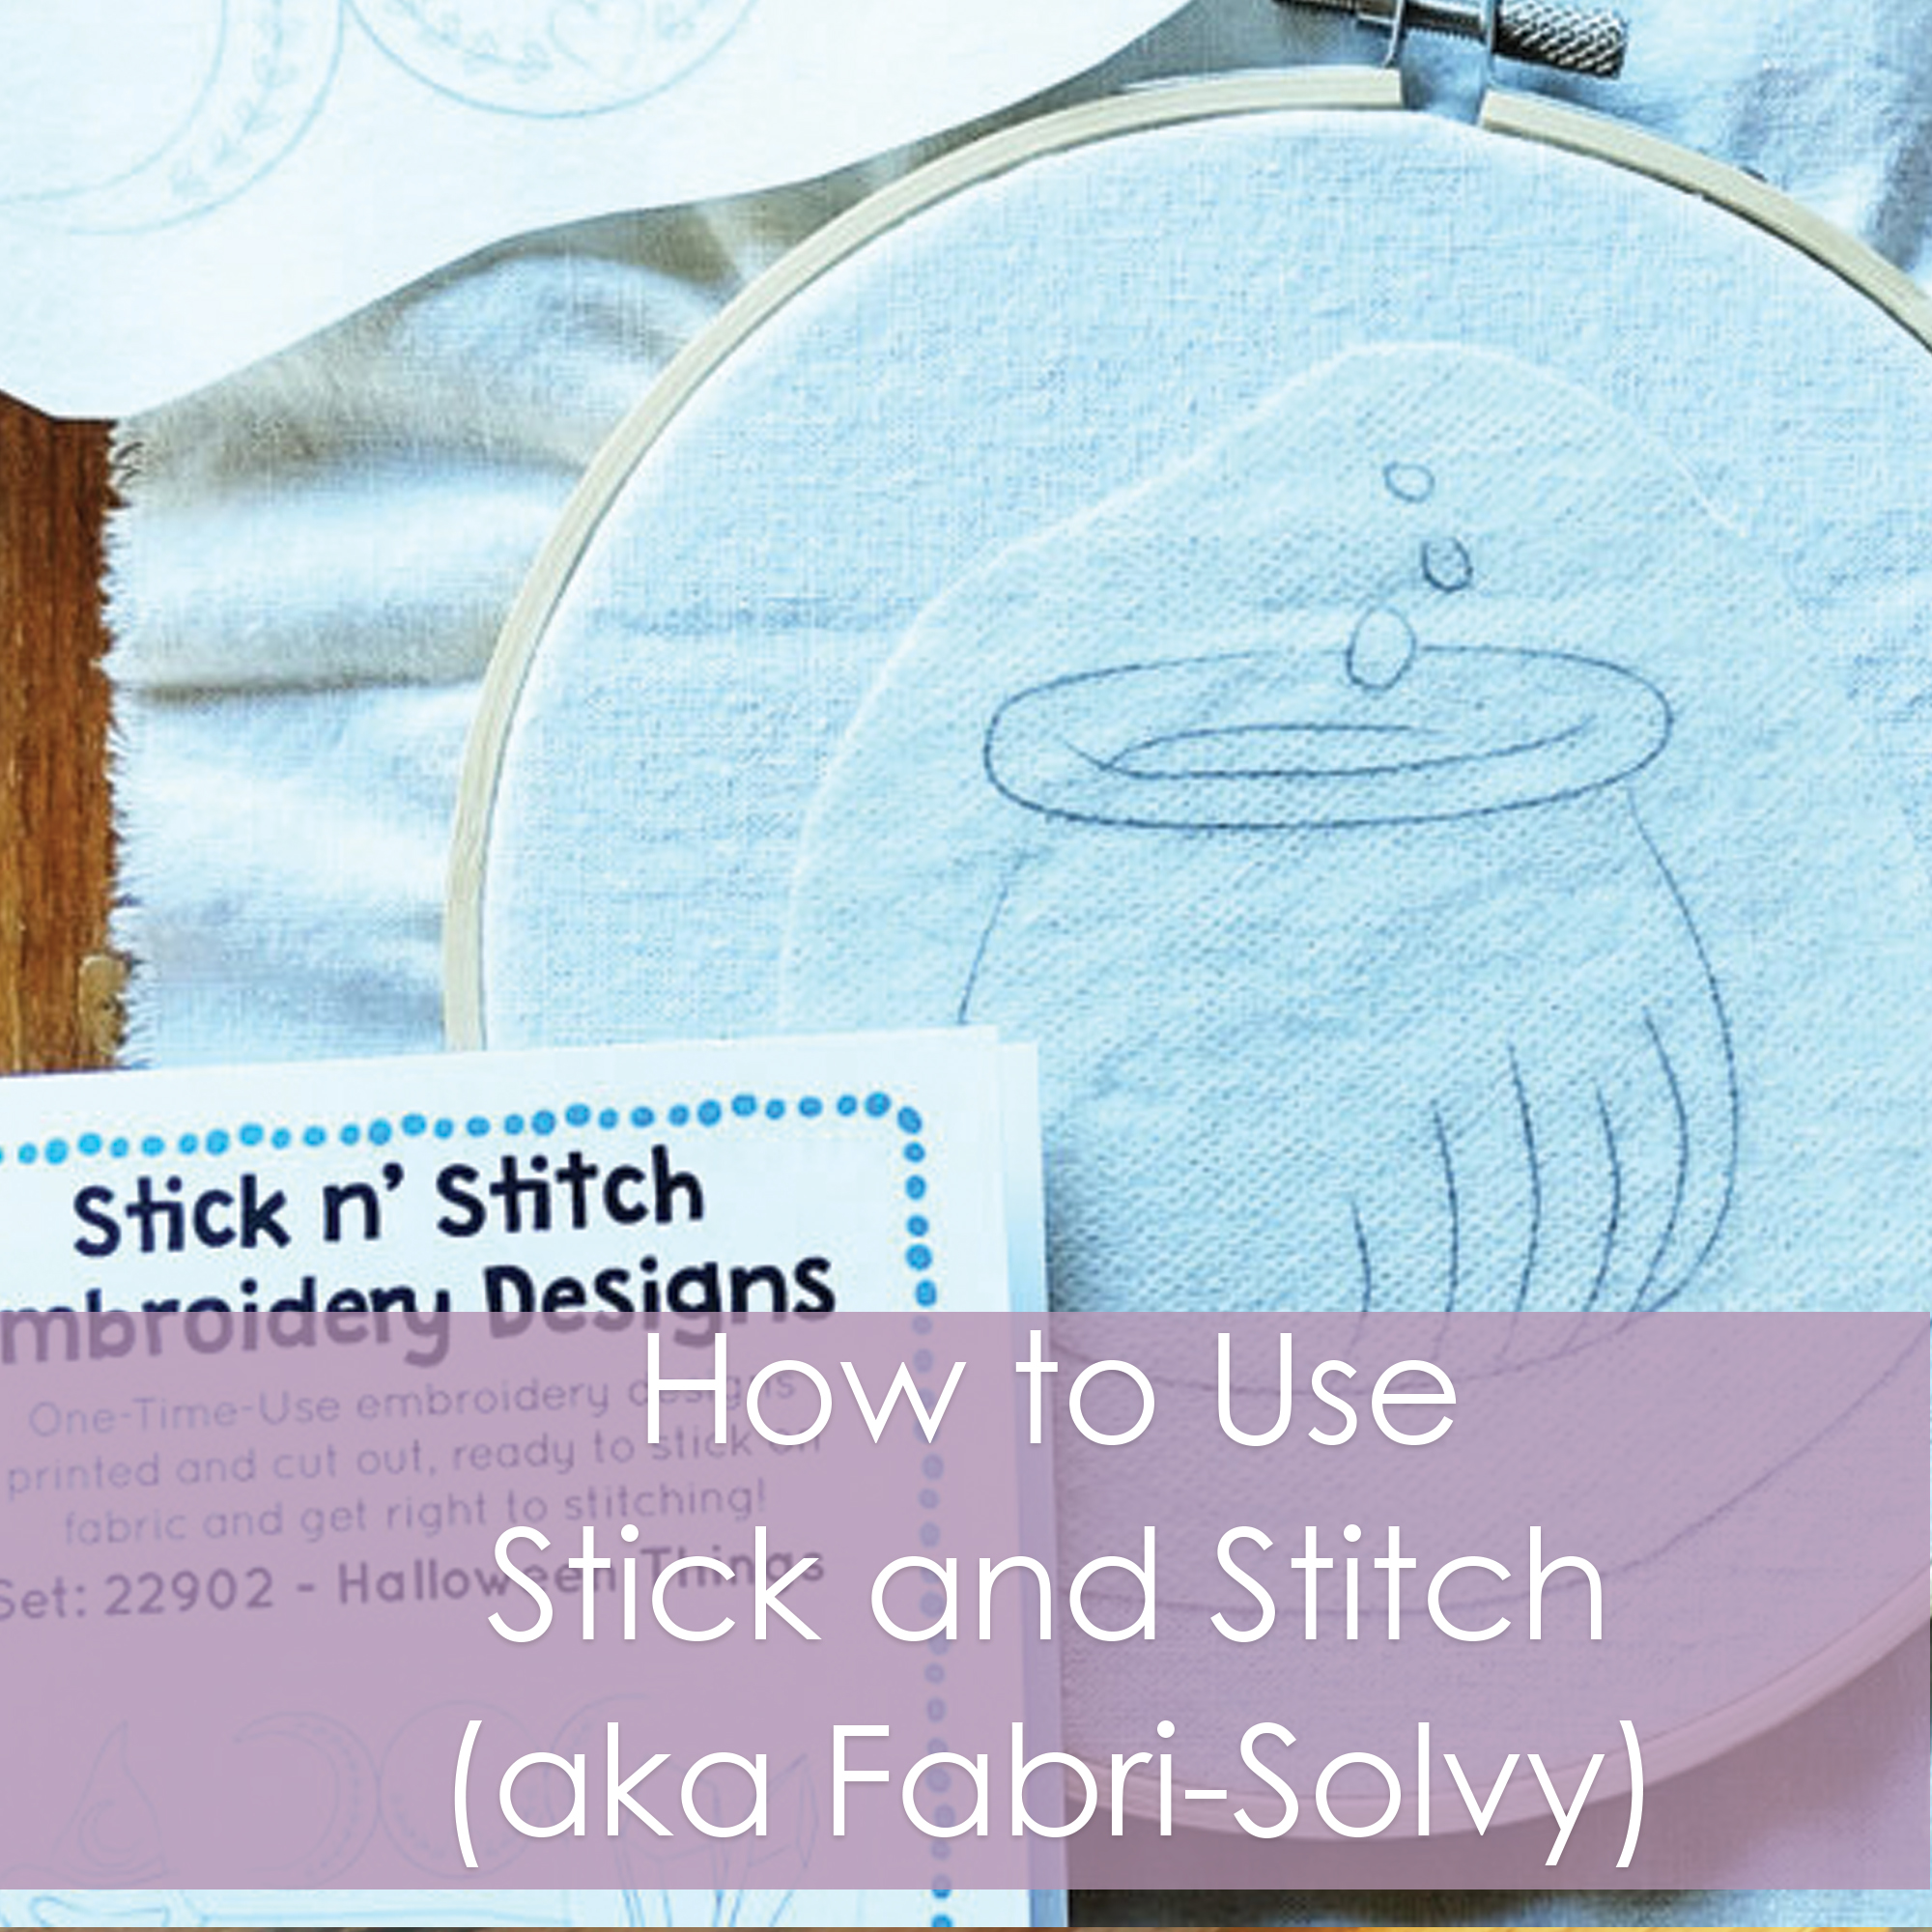 Everything You Ever Wanted to Know about Sulky Sticky Fabri-Solvy